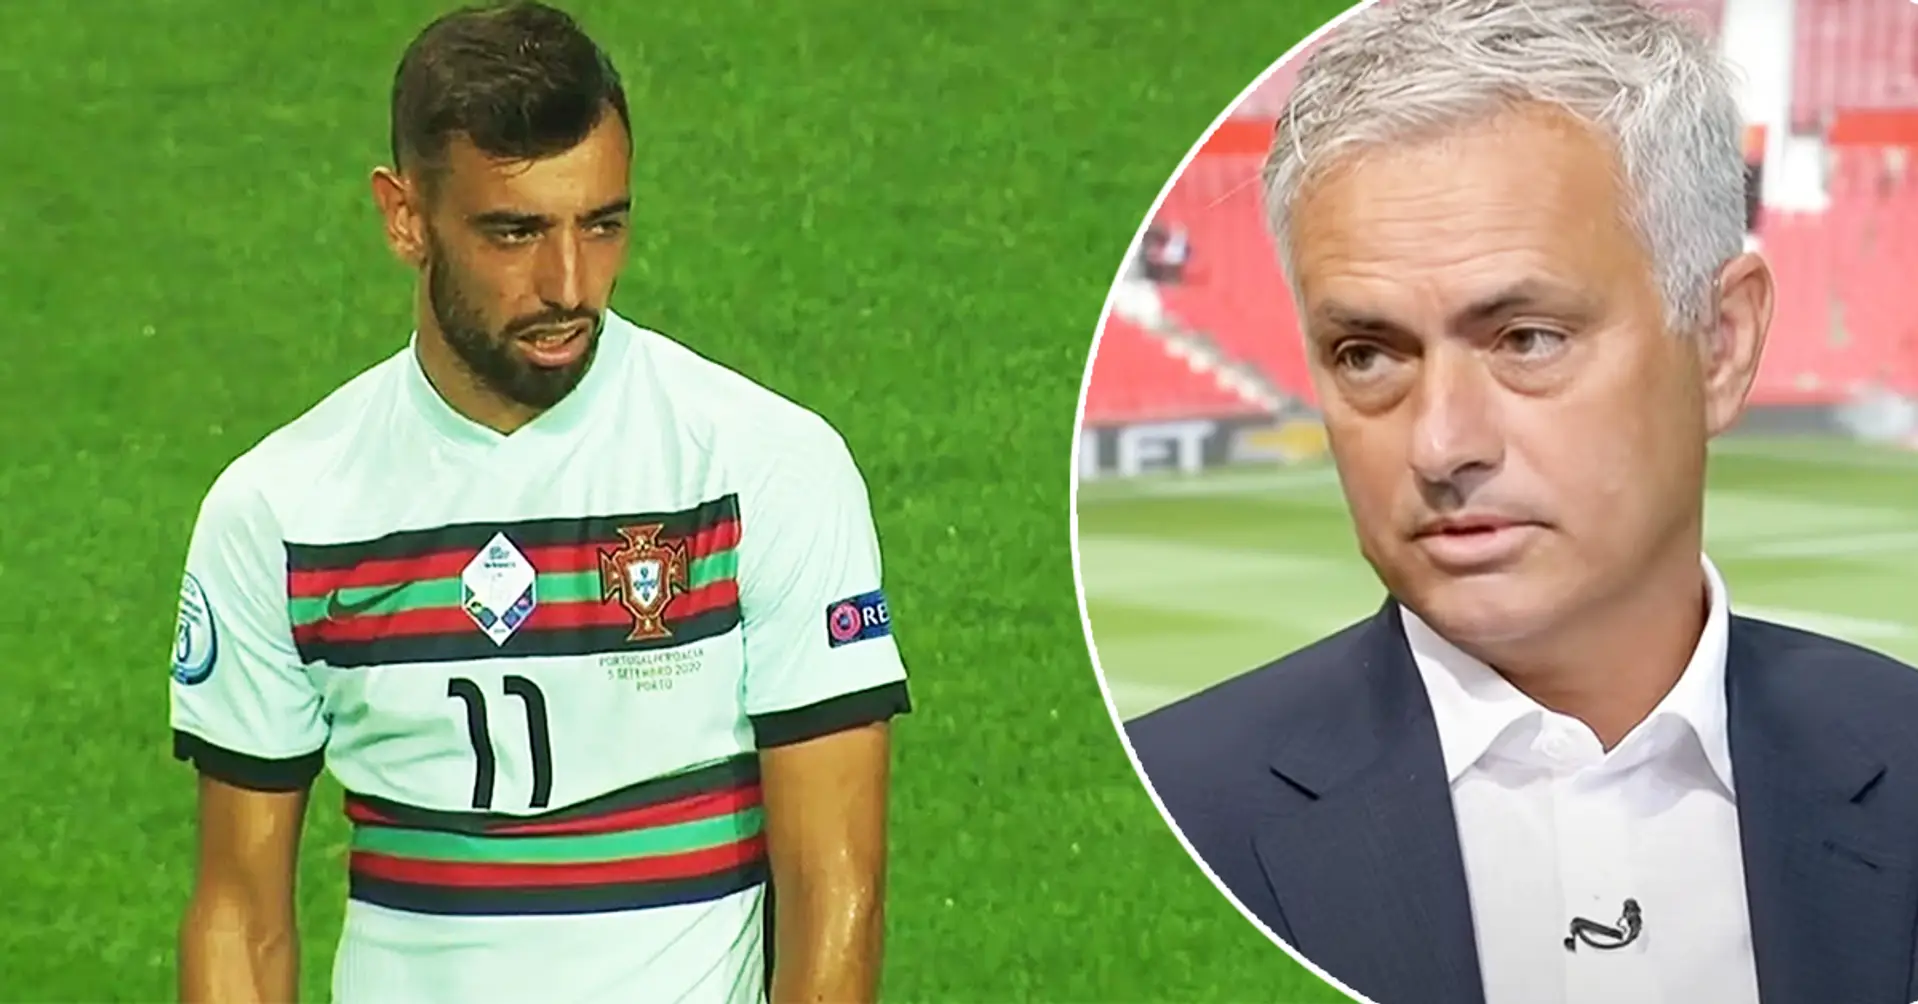 Jose Mourinho attacks Bruno Fernandes: ‘He’s on the pitch but not playing’